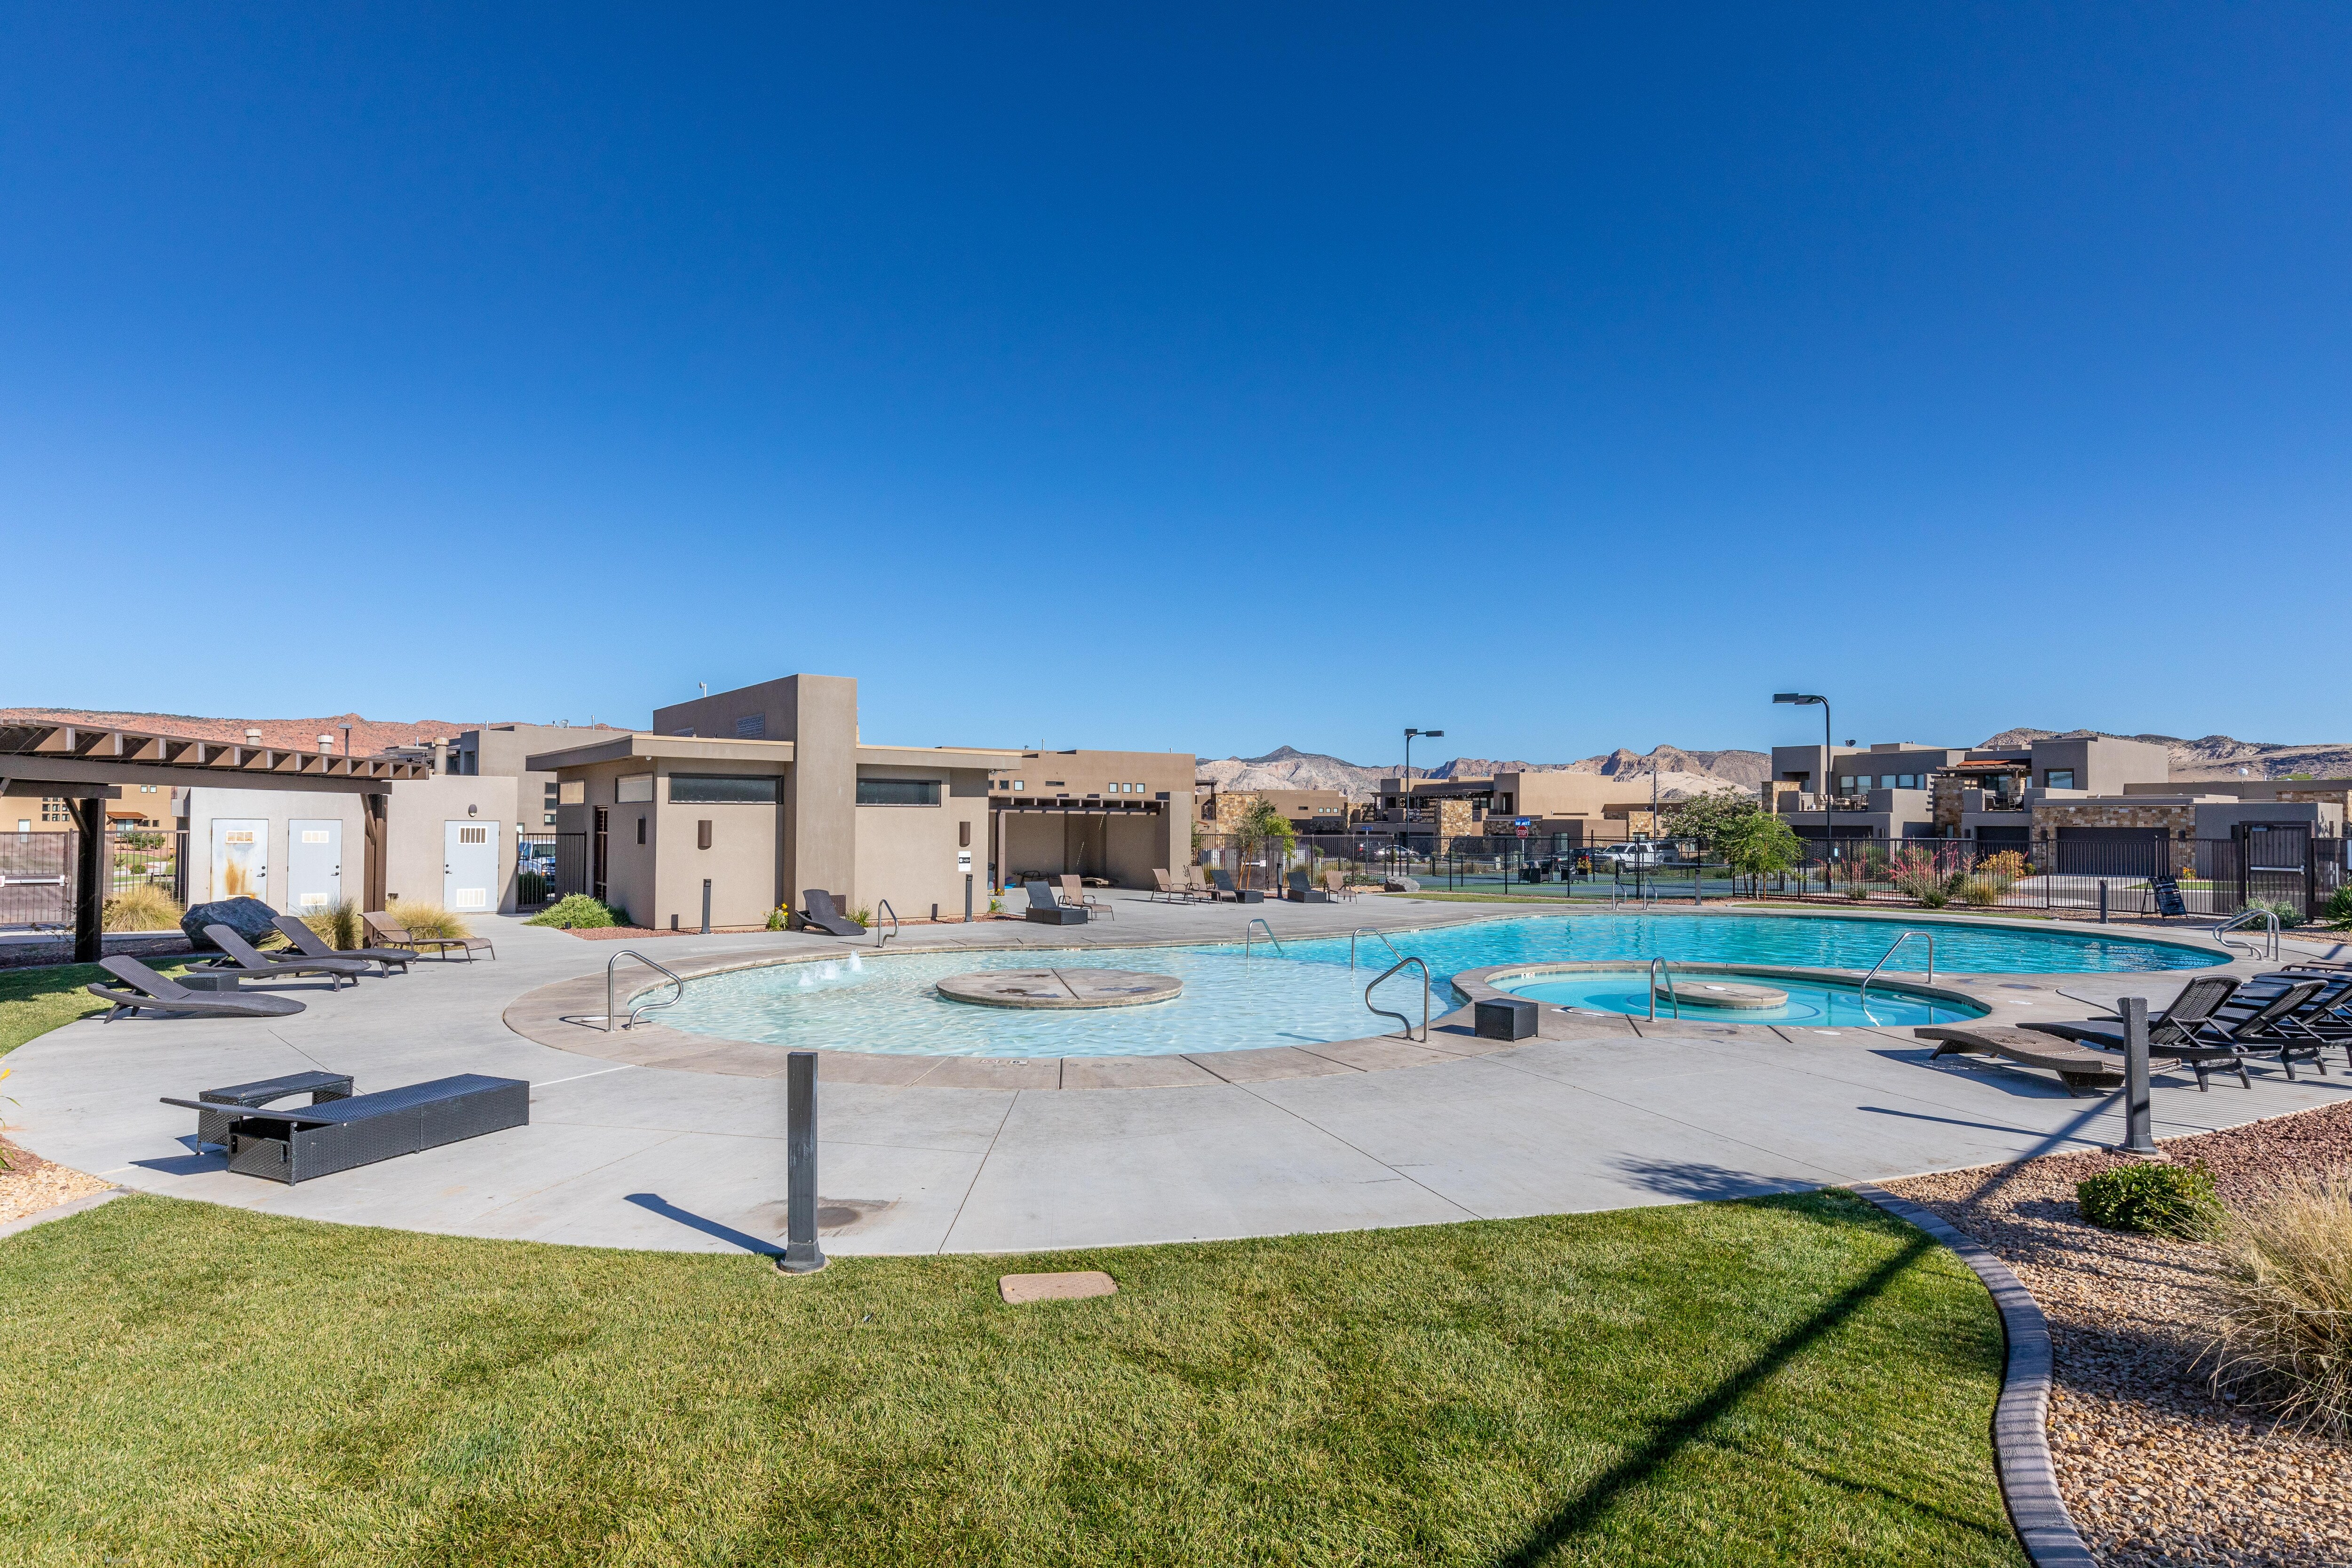 Amenities include a heated pool, heated kids pool, hot tub, two pickleball courts, and restrooms.